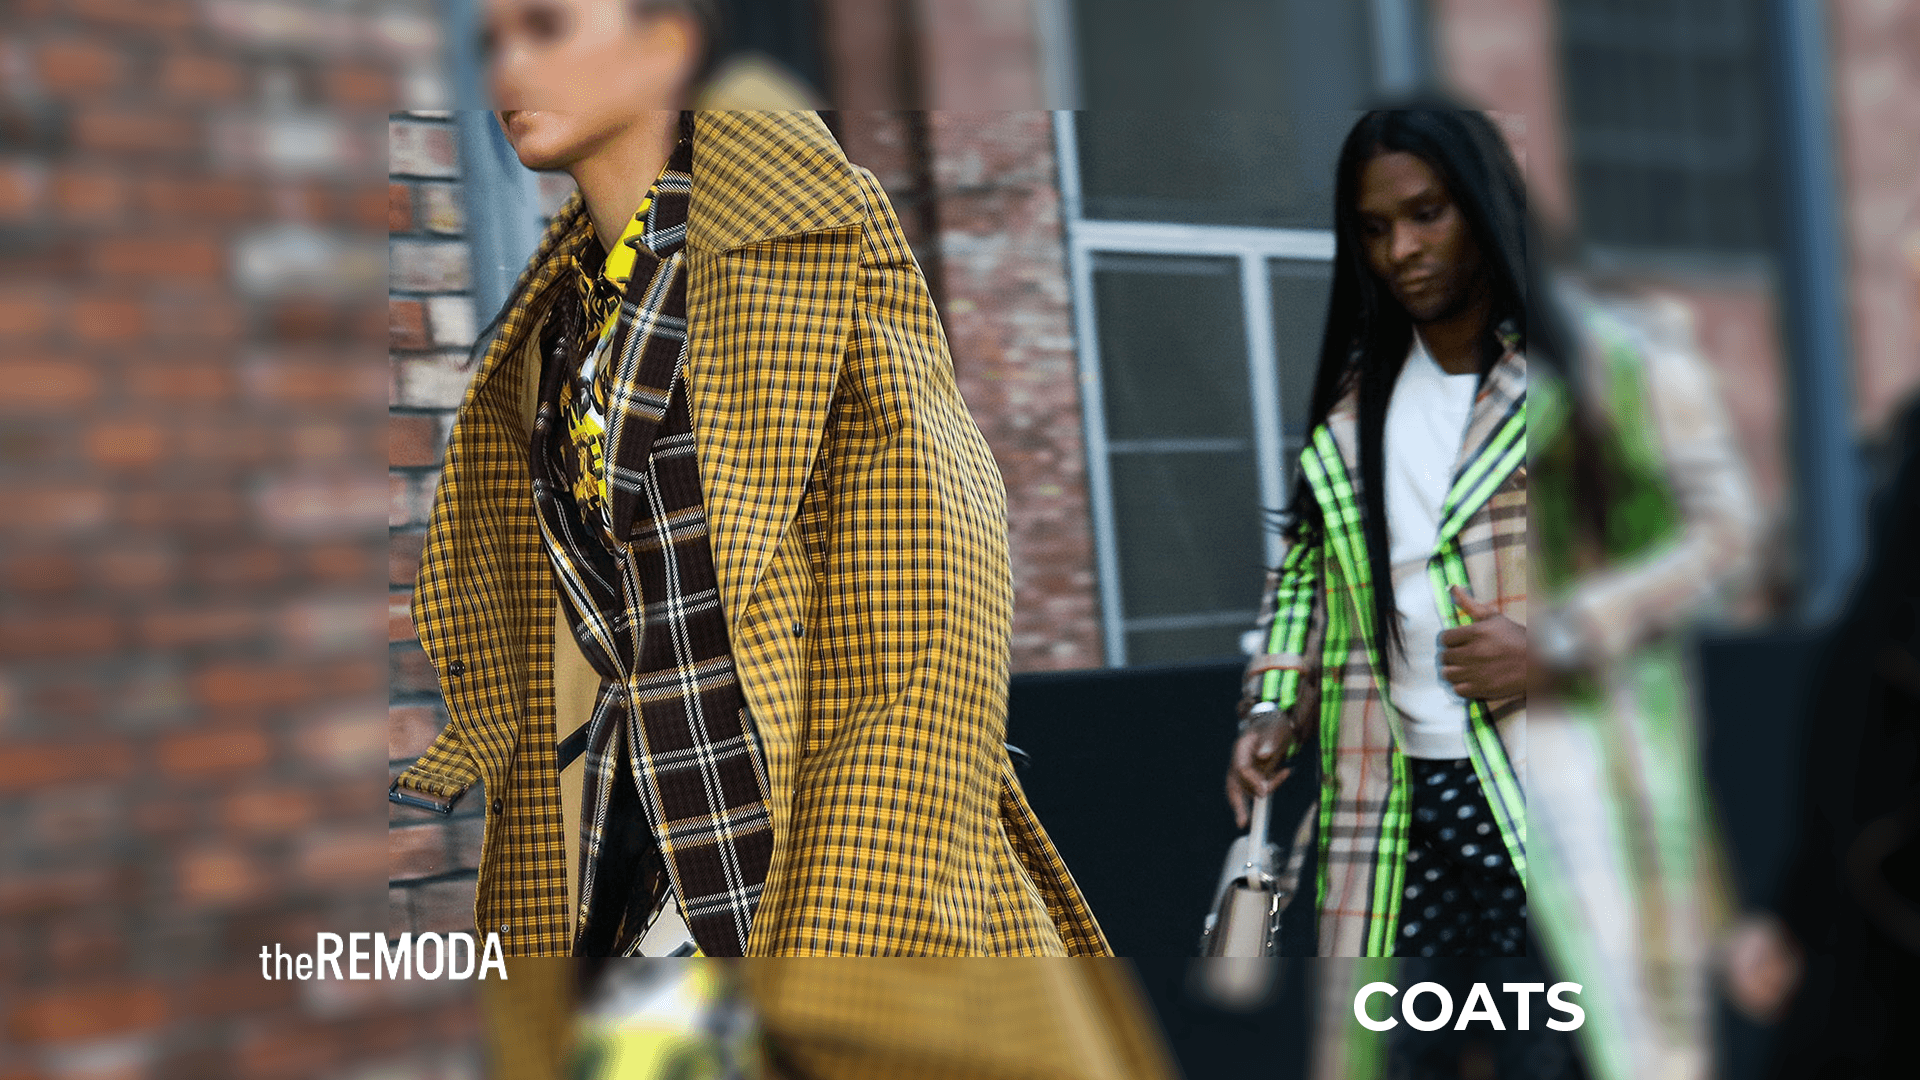 Keep your old coats close and new coats closer - theREMODA